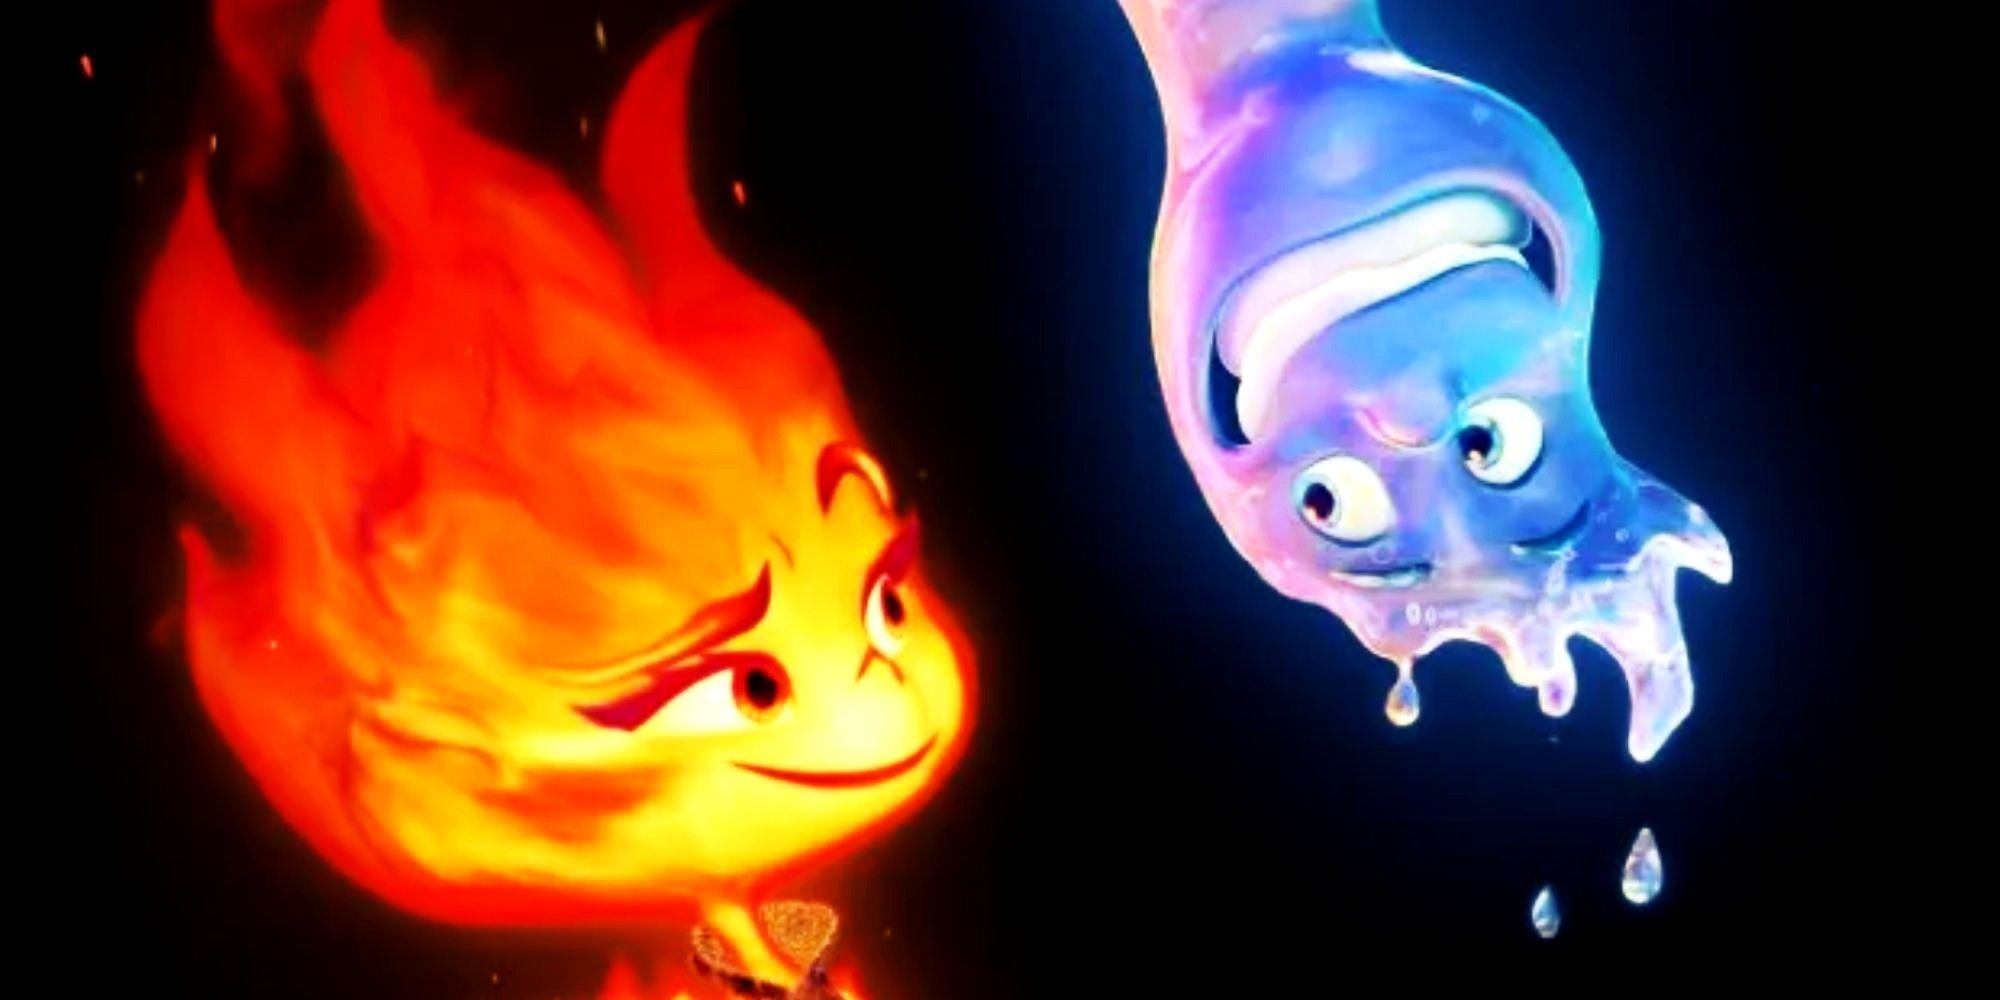 Ember smiles while Wade looks at her upside down on an Elemental poster that has been cropped